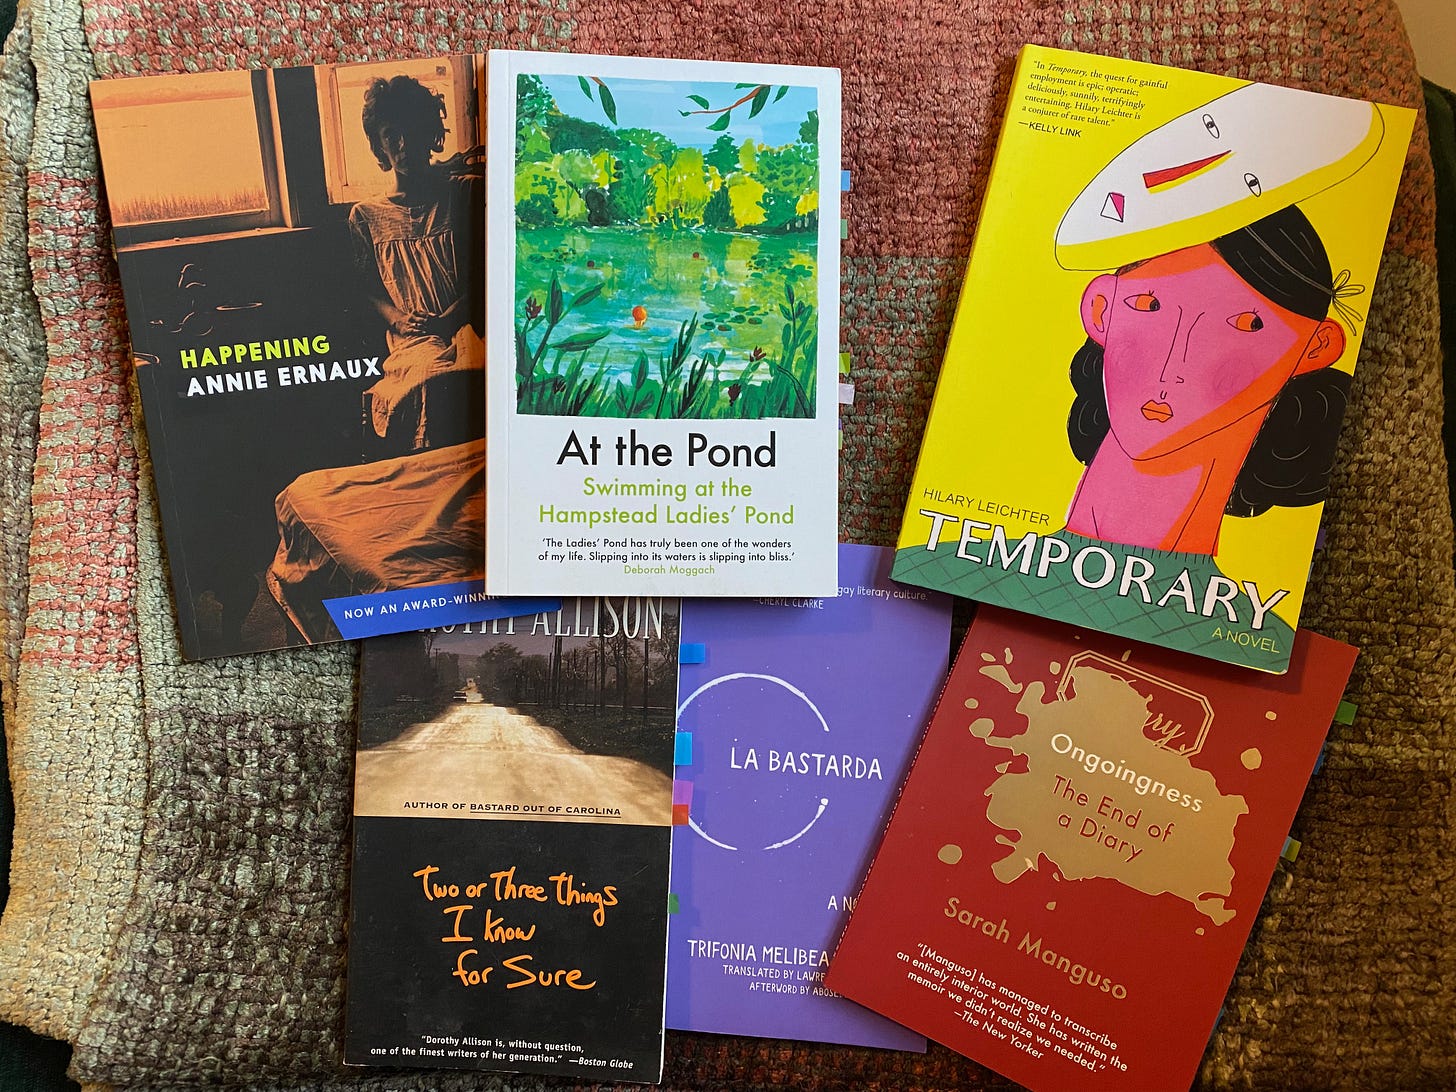 Six short books spread out on a red and green blanket: Happening, At the Pond, Temporary, Two or Three Things I Know for Sure, La Bastarda, Ongoingness.